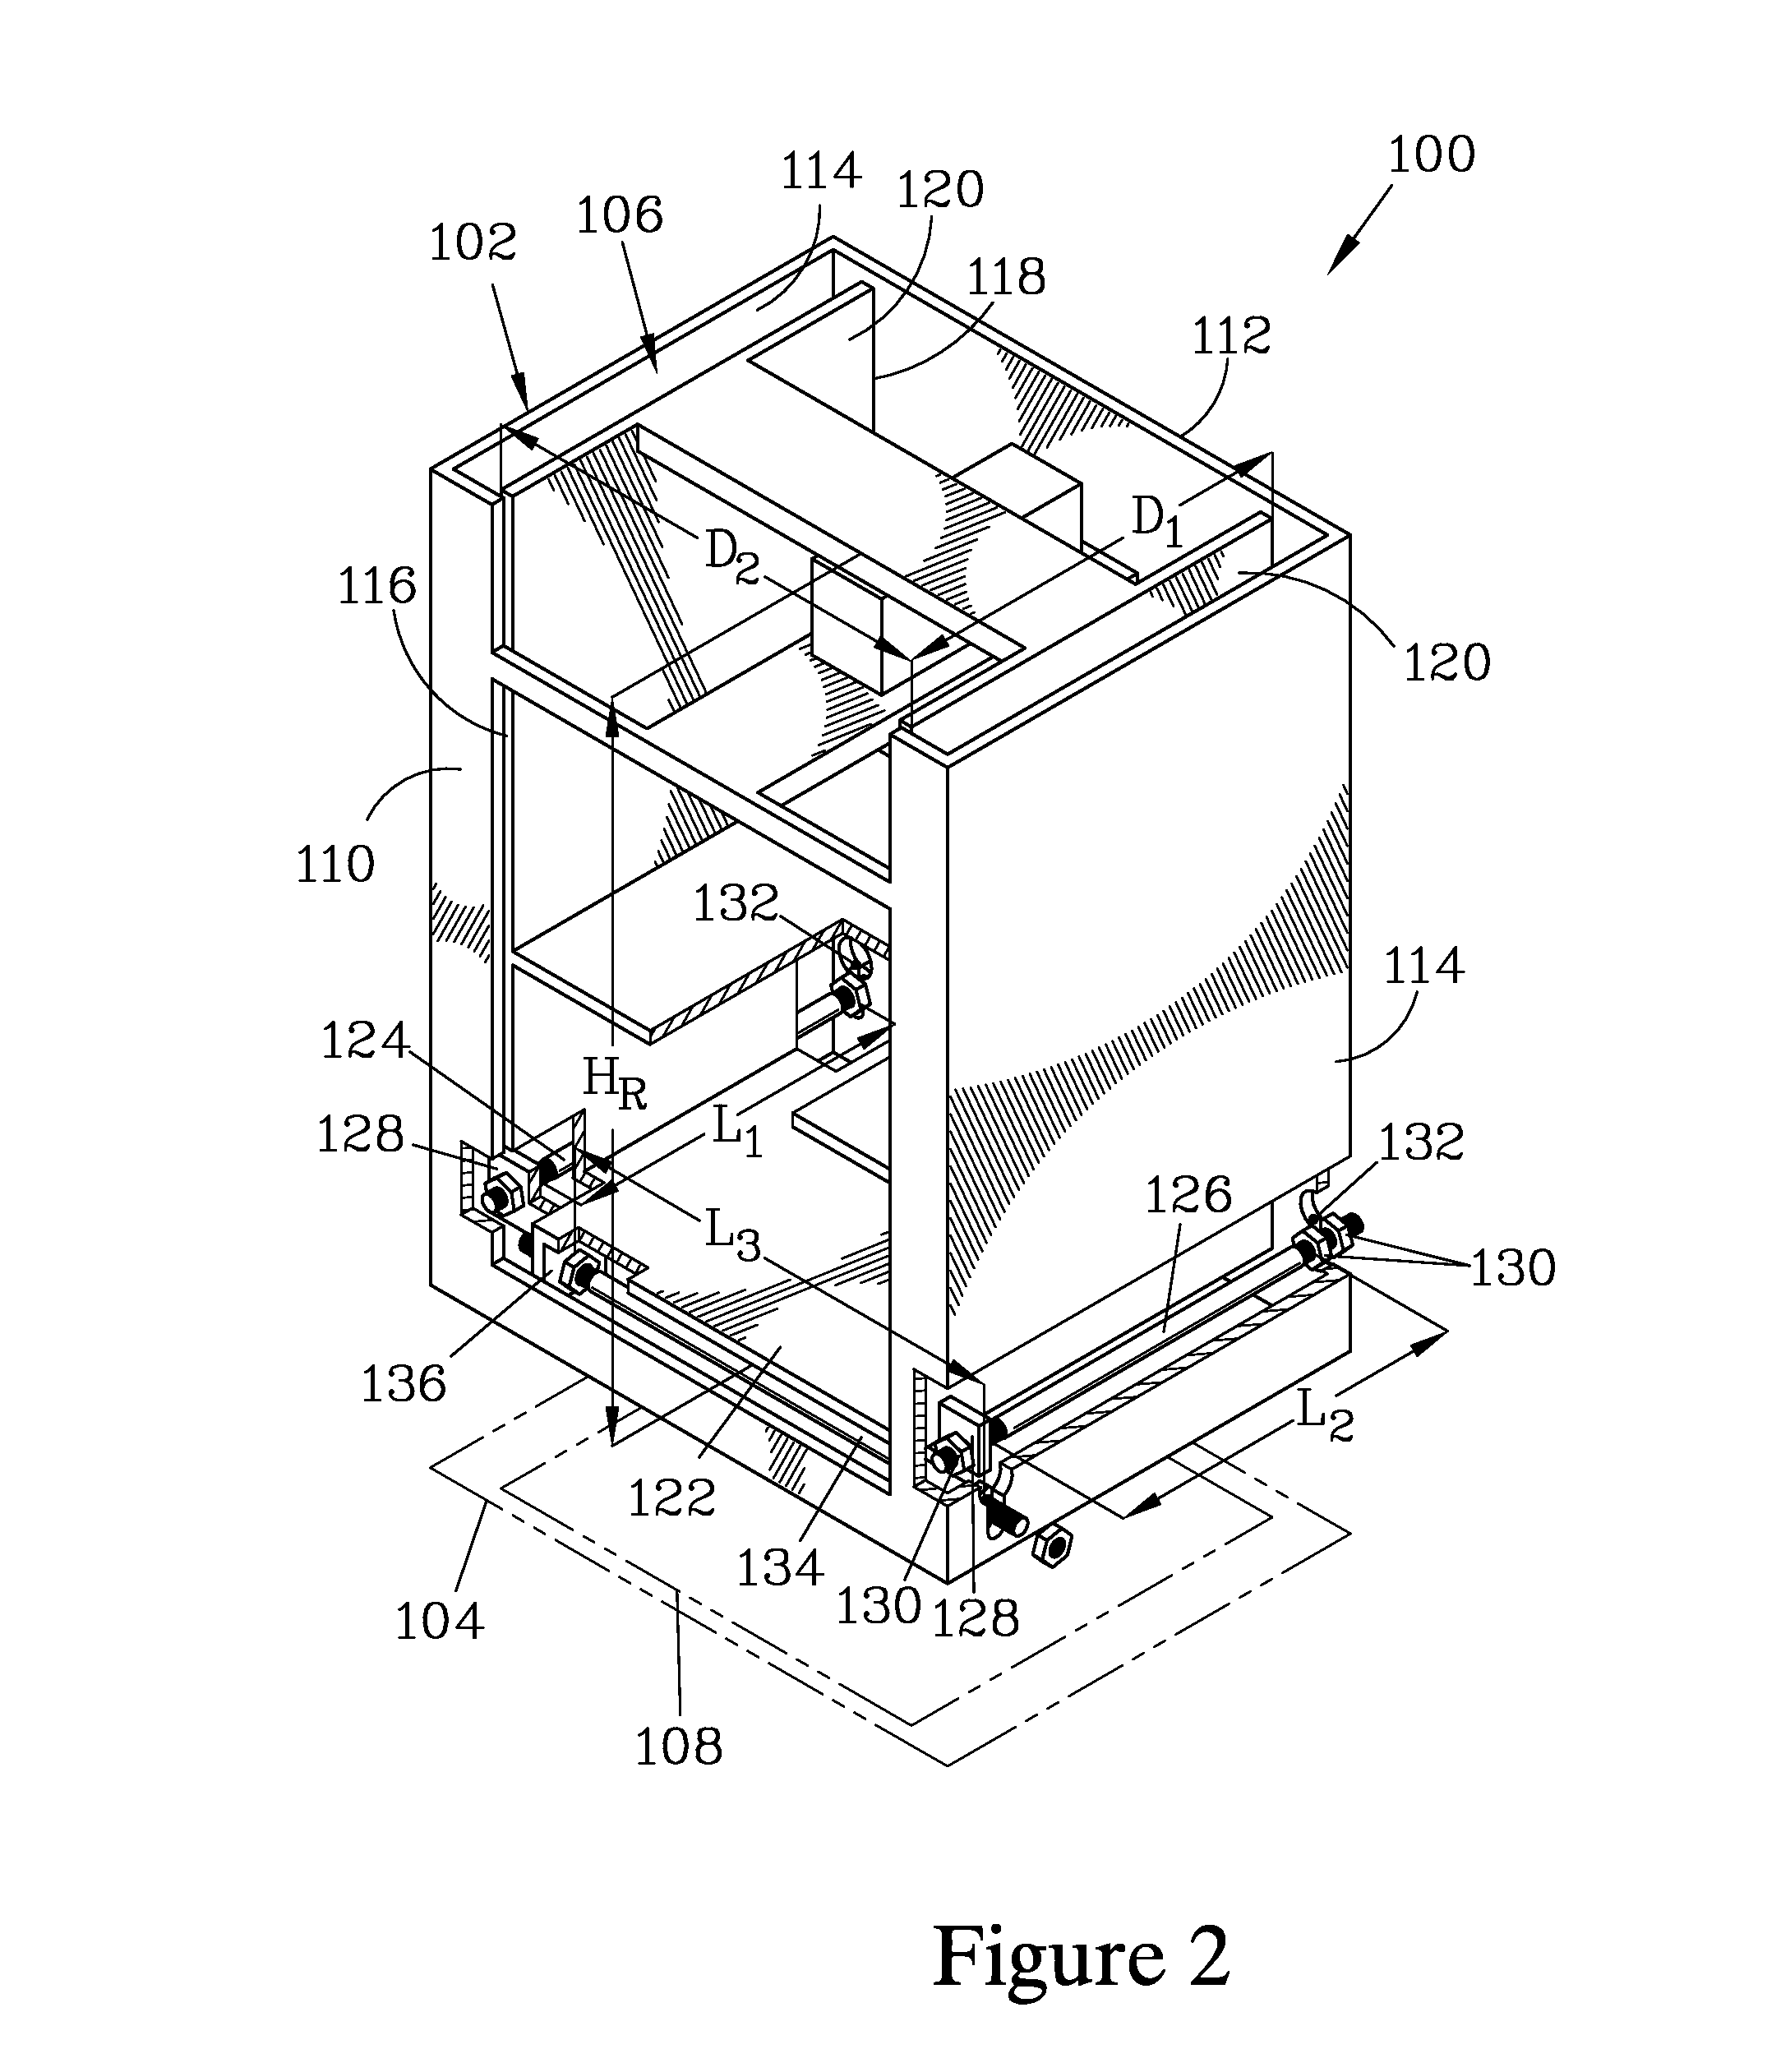 Shelving system for use with load cell